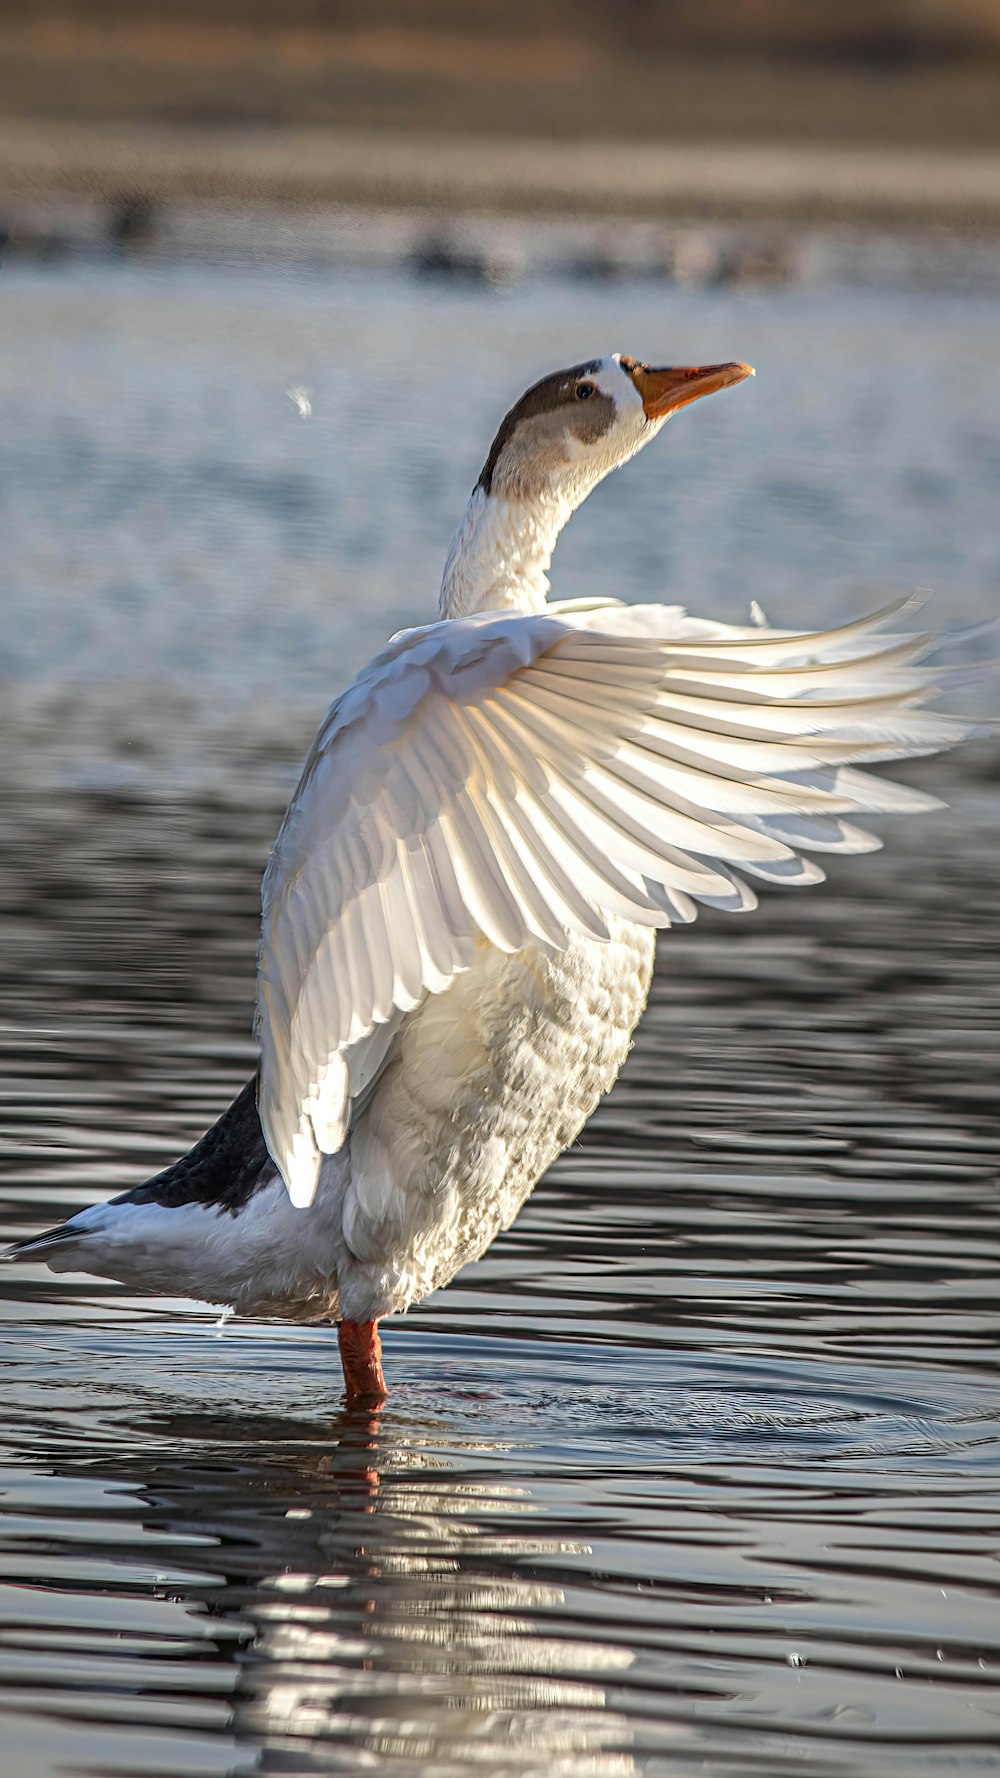 a white duck with its wings spread out in the water